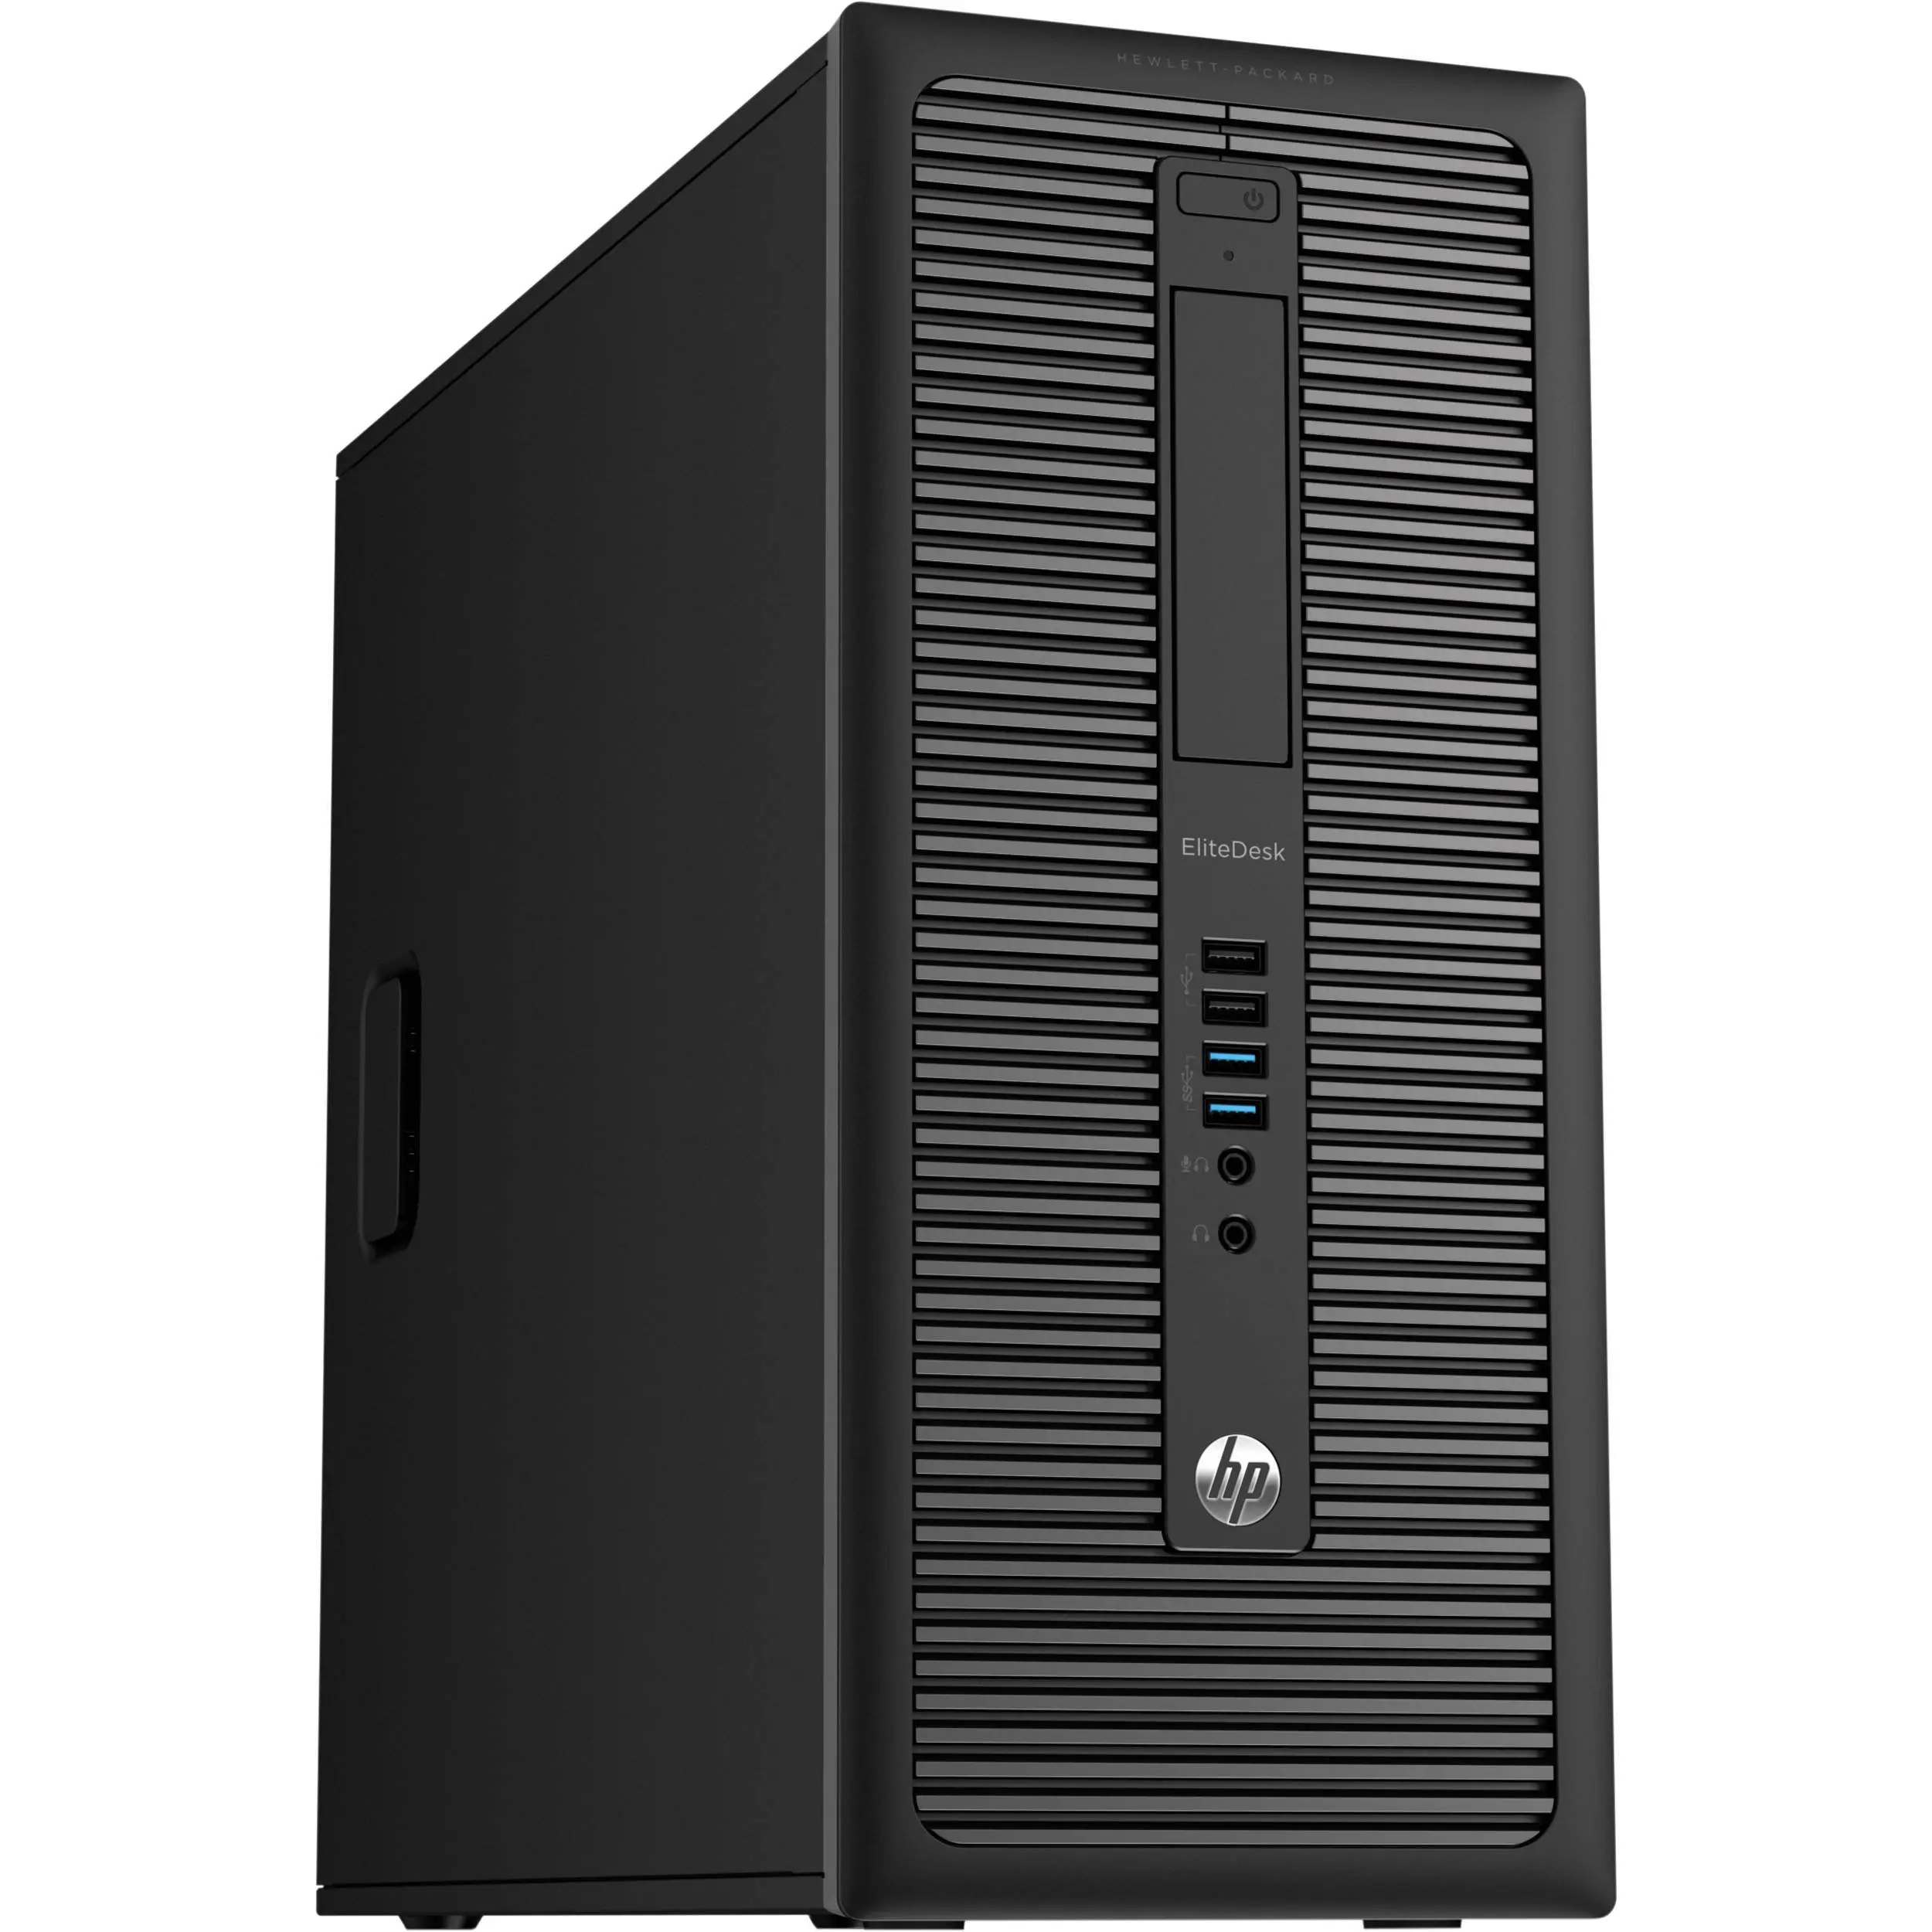 hewlett-packard 800 g1 tower i7 4770 - How many cores does HP Elitedesk 800 g1 have